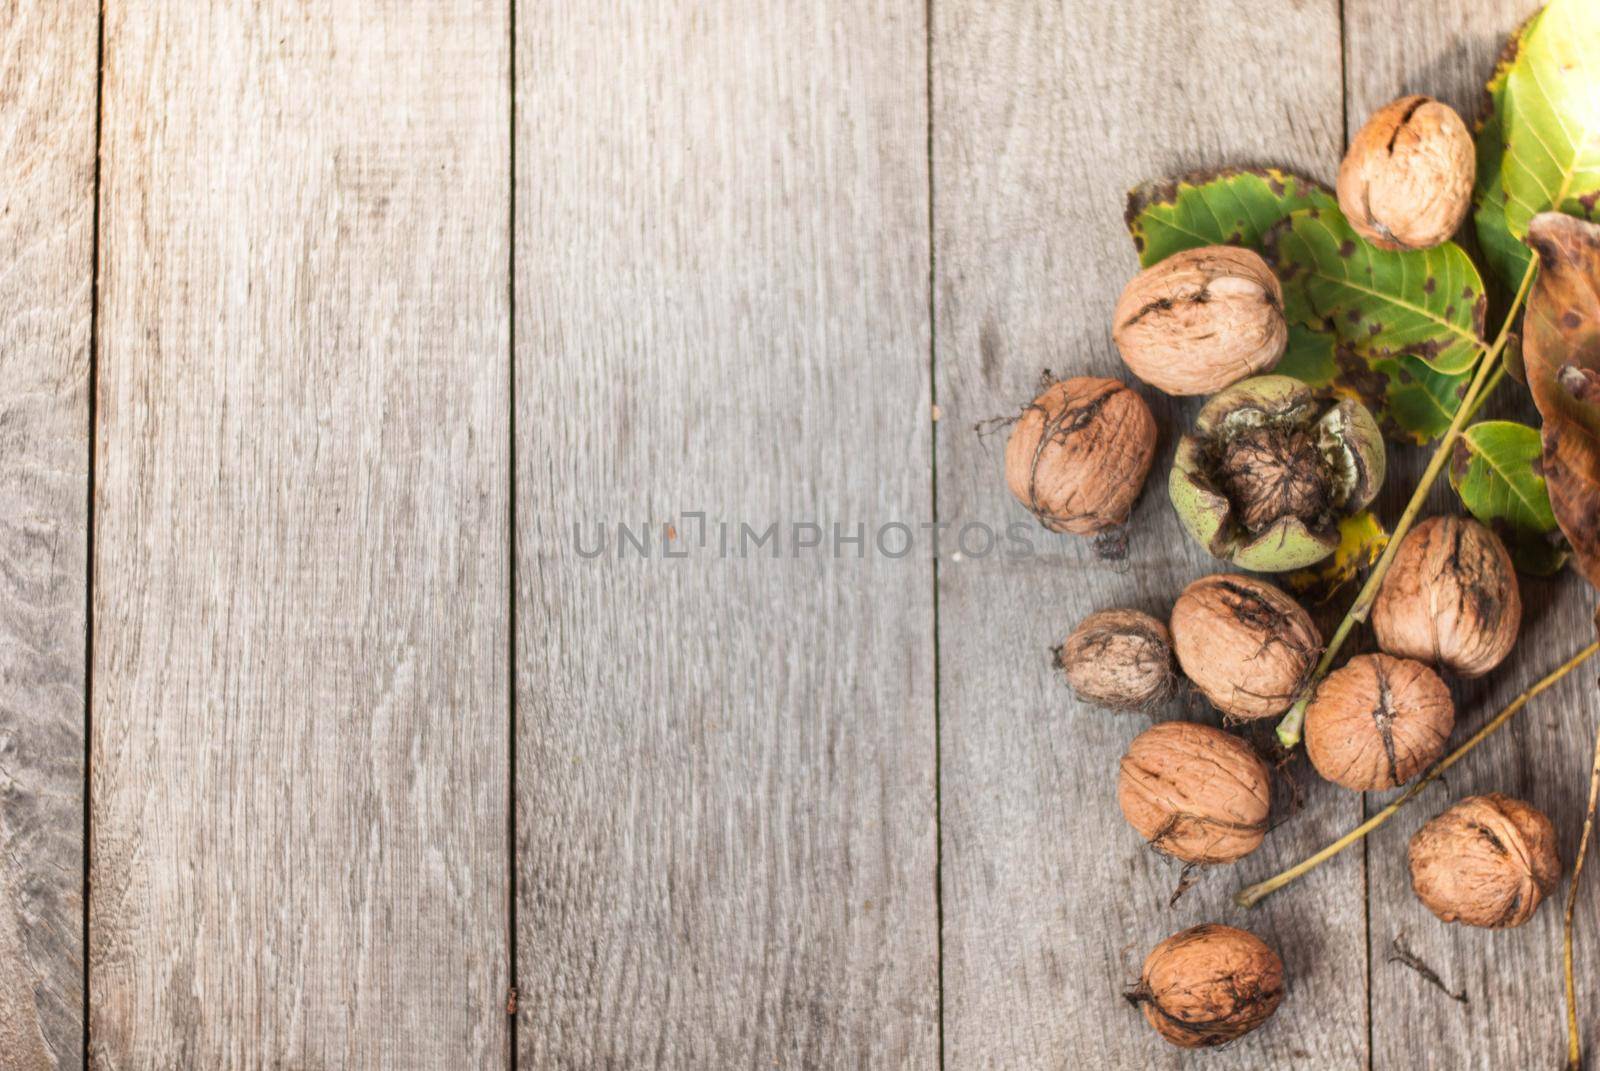 walnut on wooden background with leaves and nutshell crached